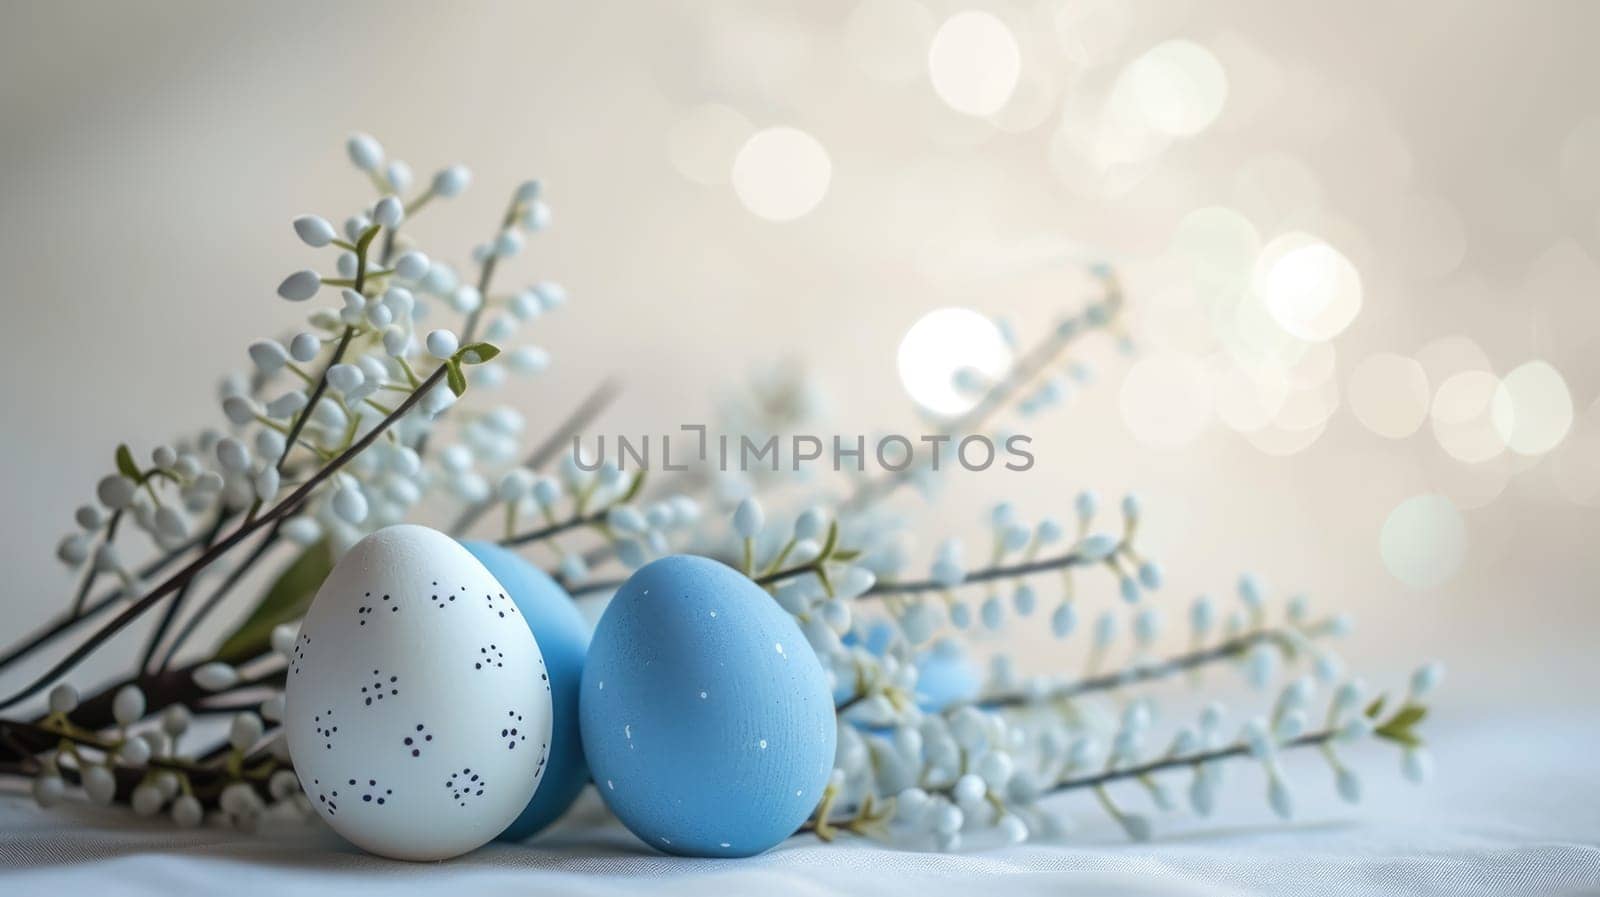 Two blue Easter eggs with white polka dots on light blue background with white babys breath flowers on the left side of the image. Perfect for Easter, spring, or holiday projects.